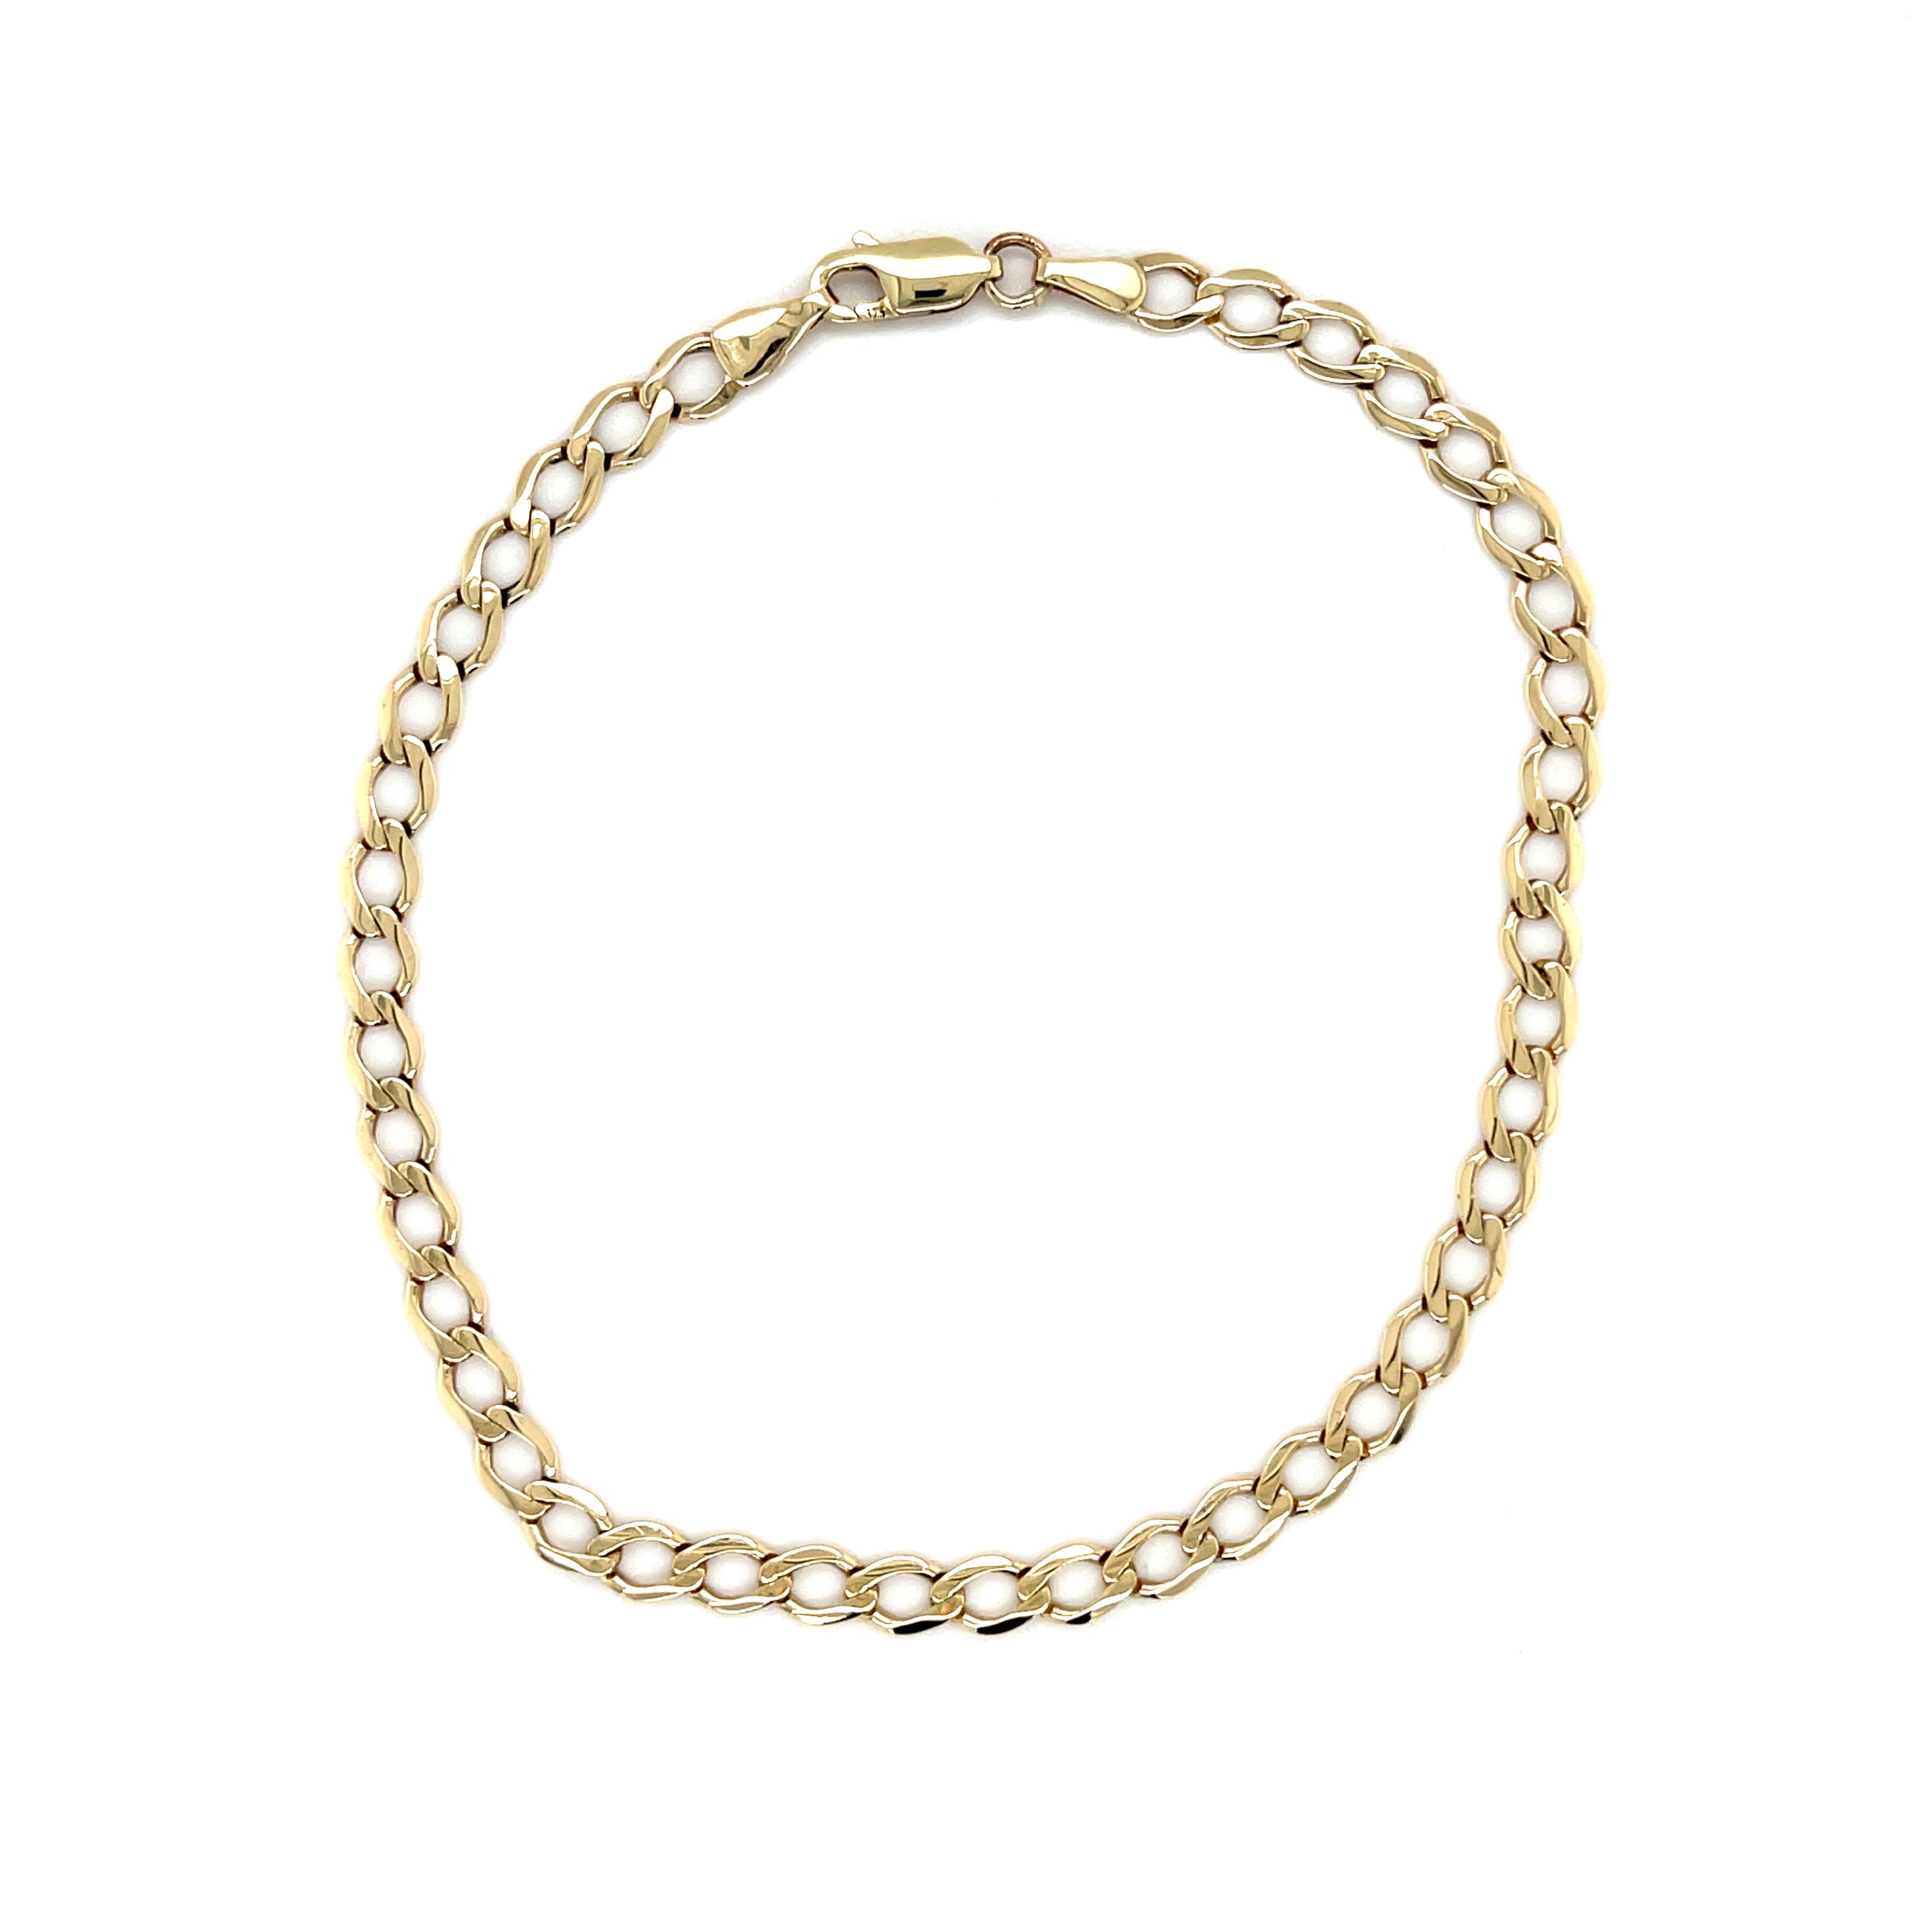 9ct Yellow Gold 8.5 Inch Curb Link Bracelet - 3.40g